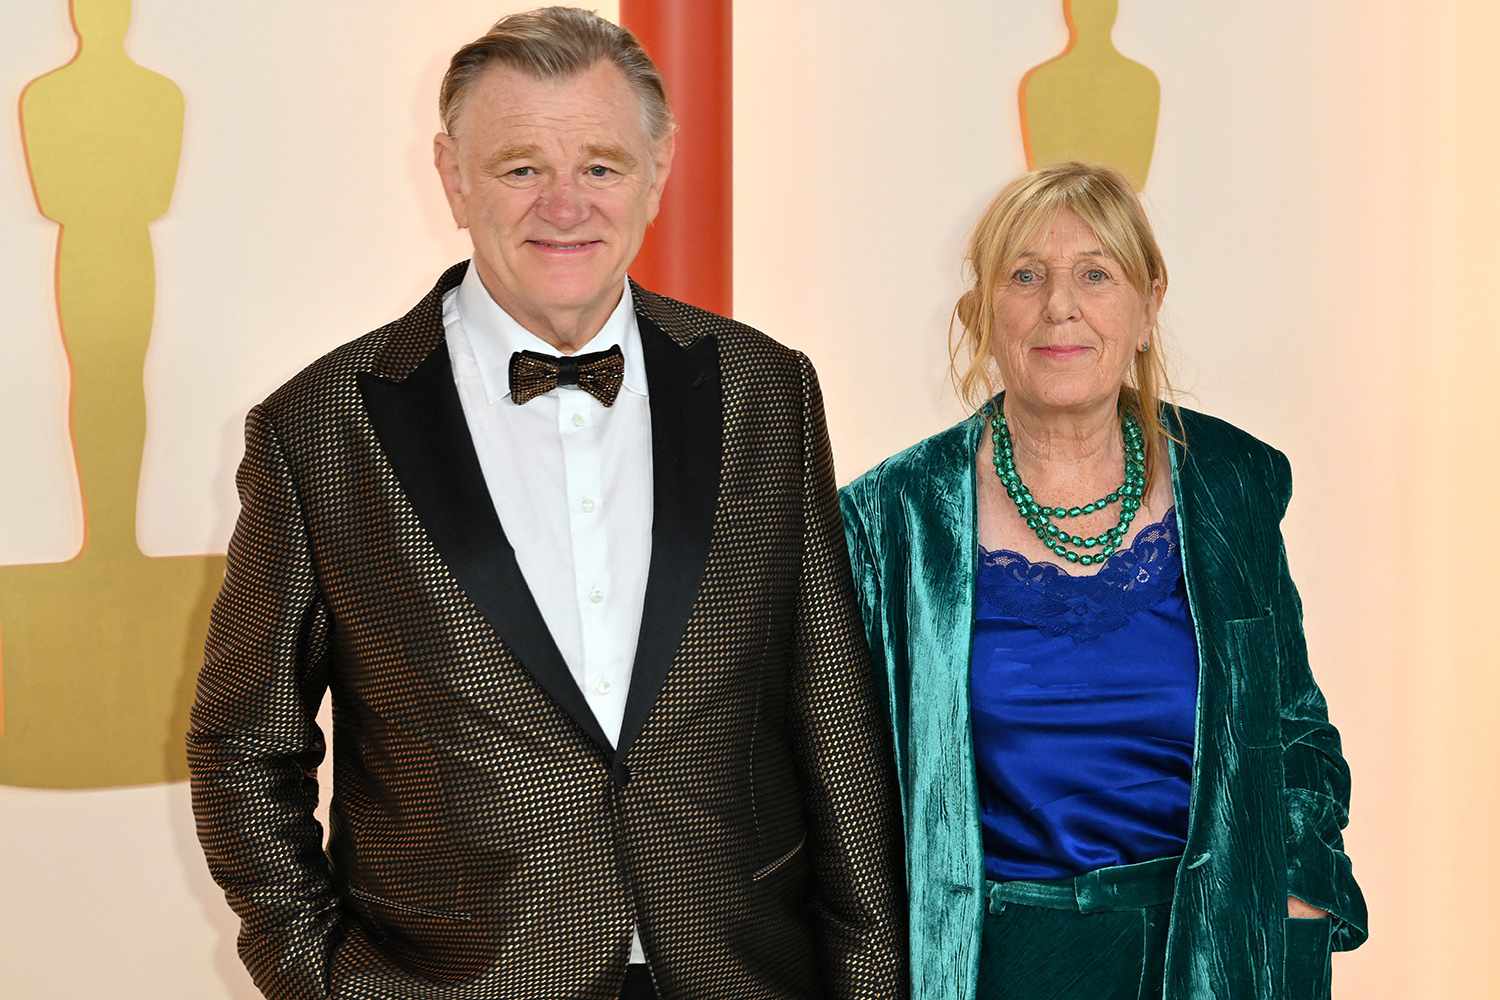 Irish actor Brendan Gleeson and his wife Mary Gleeson attend the 95th Annual Academy Awards at the Dolby Theatre in Hollywood, California on March 12, 2023. (Photo by ANGELA WEISS / AFP) (Photo by ANGELA WEISS/AFP via Getty Images)